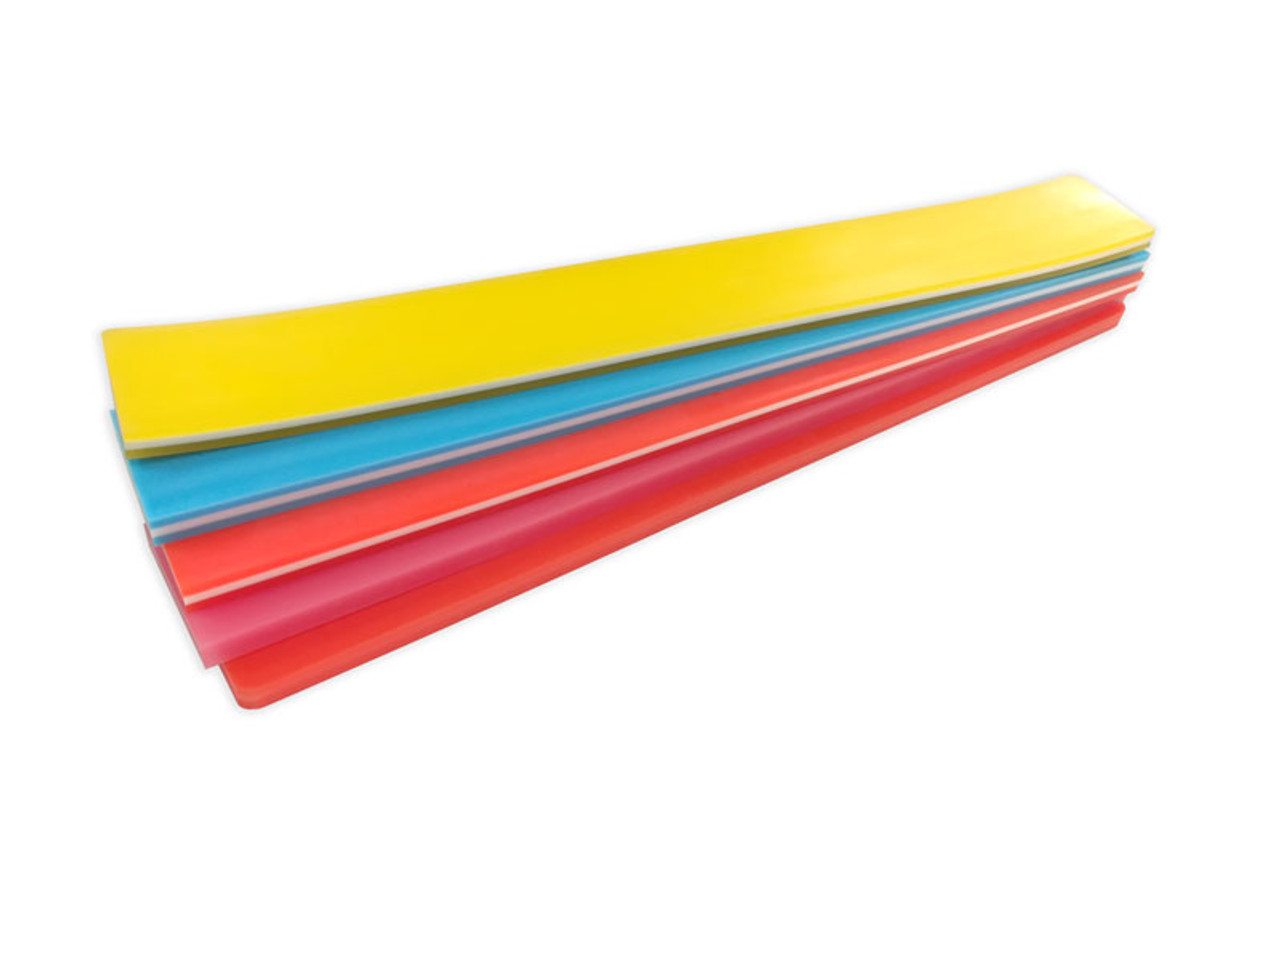 Squeegee Rubber - Action Engineering, Inc.